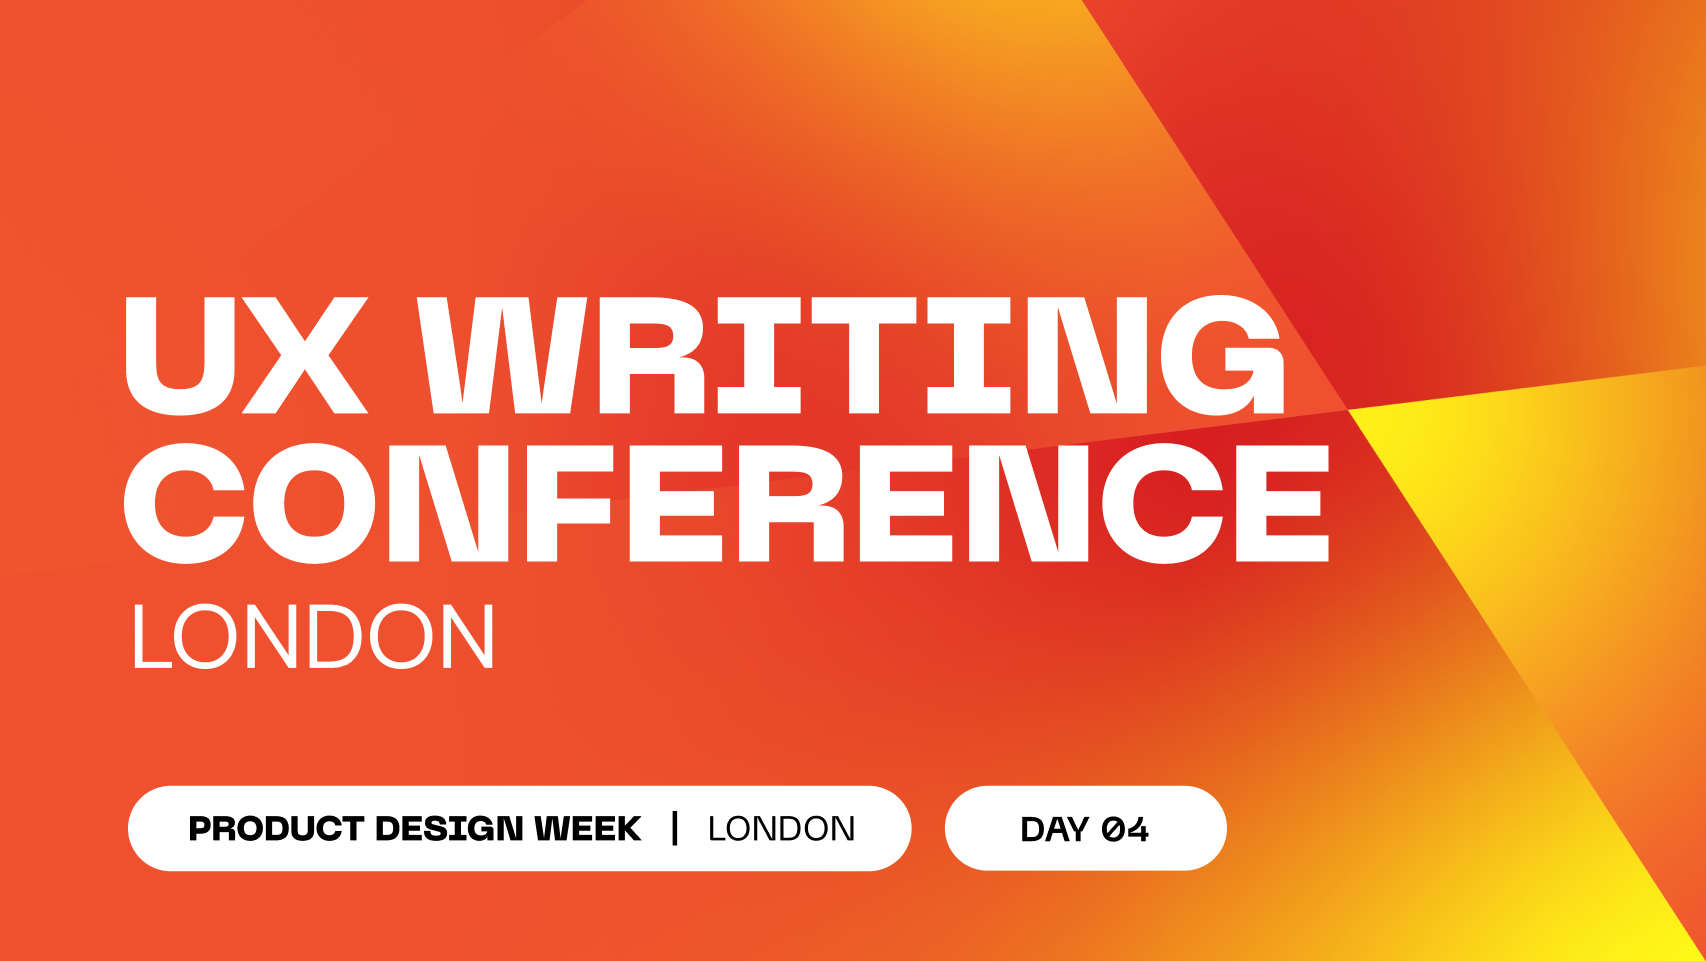 UX Writing Conference London